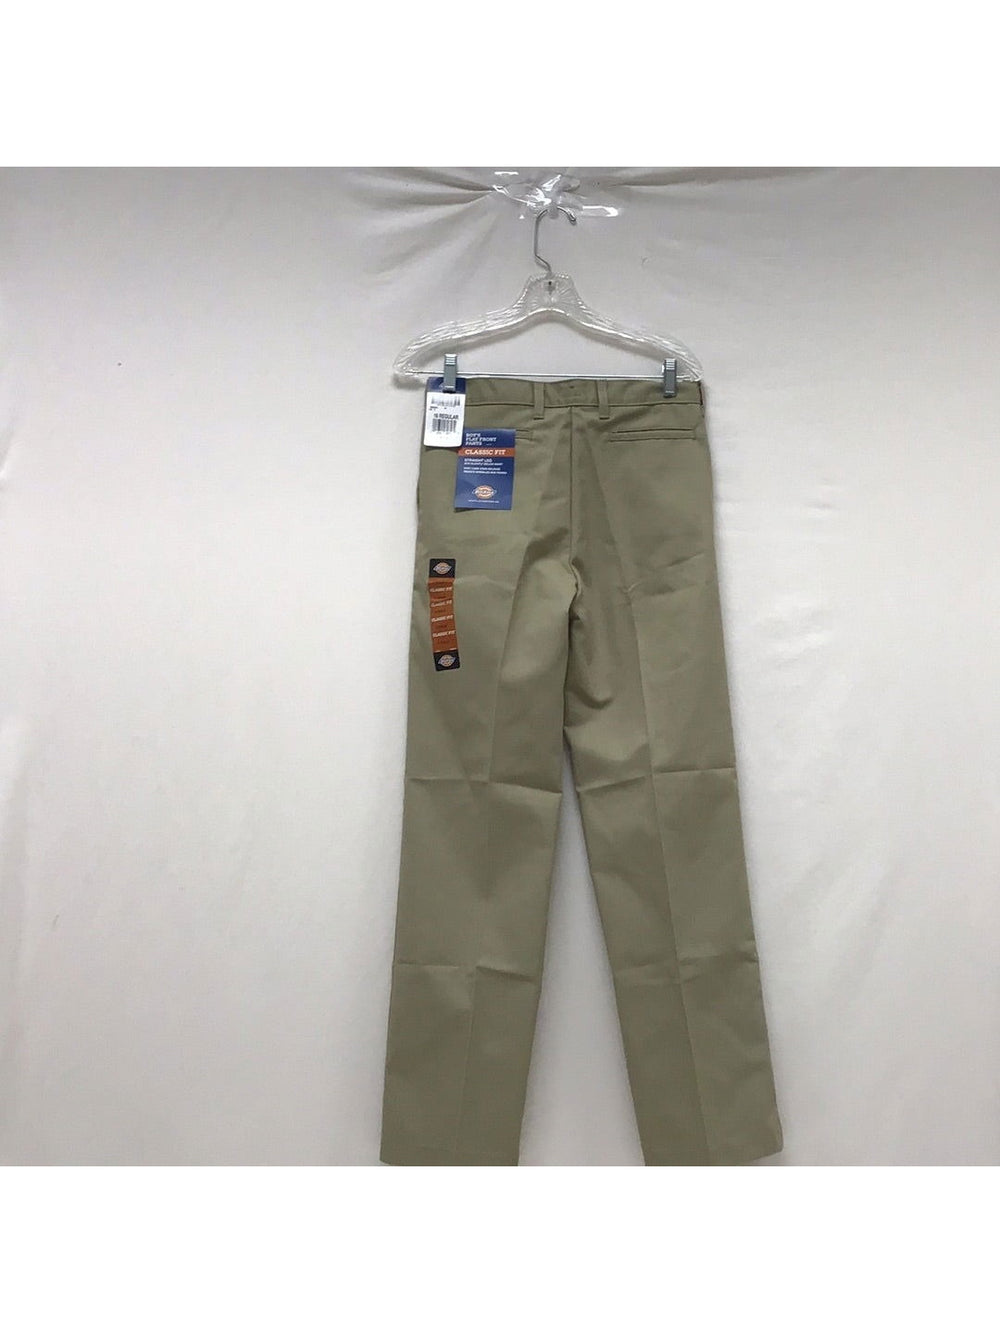 Dickies Boy Tan Carpenter Work   Canvas pants - The Kennedy Collective Thrift - 